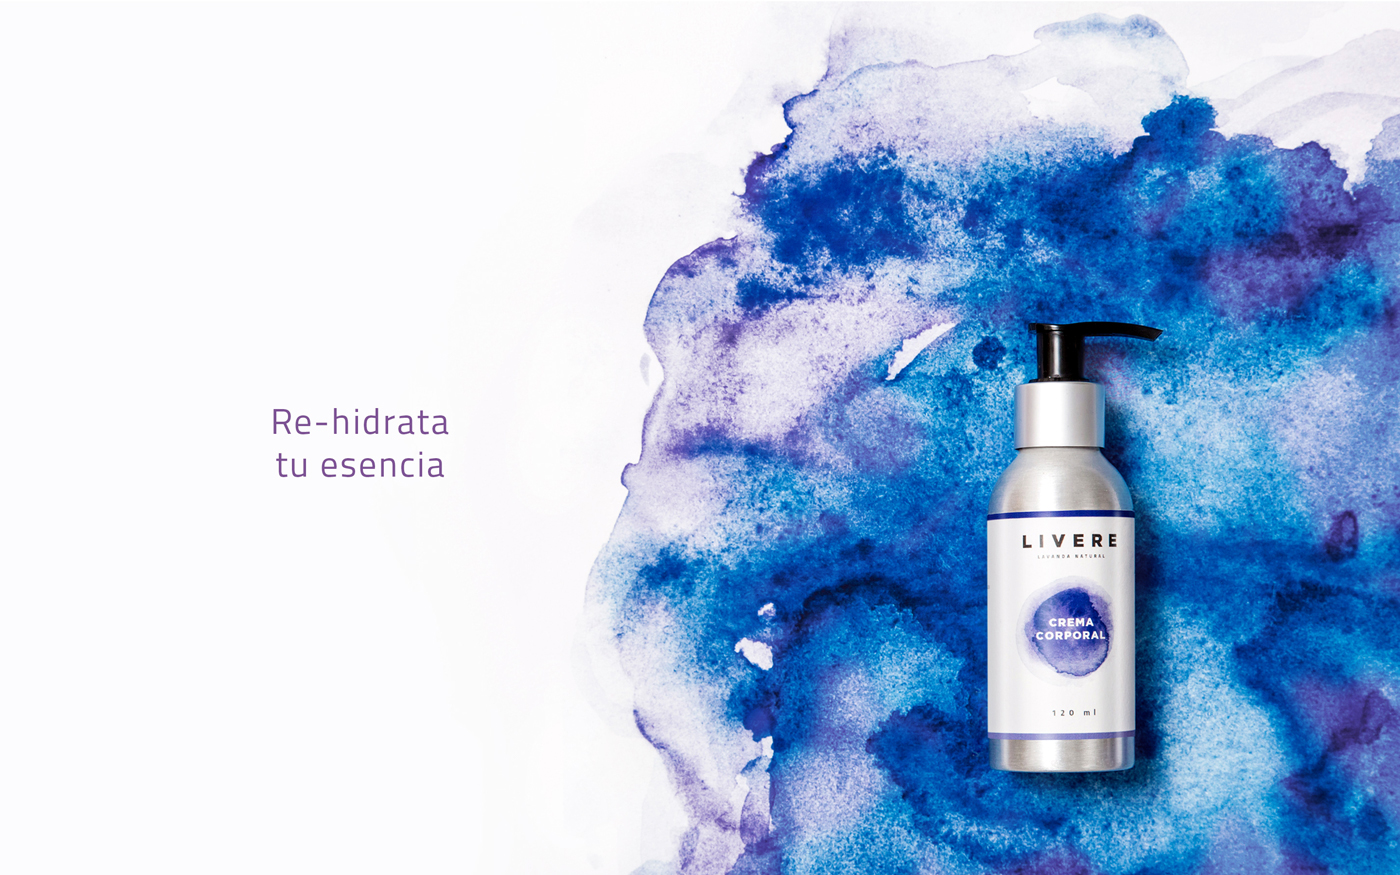 watercolor blue experimental agency lavender mexico product beauty White color Nature clean minimal healthy handmade